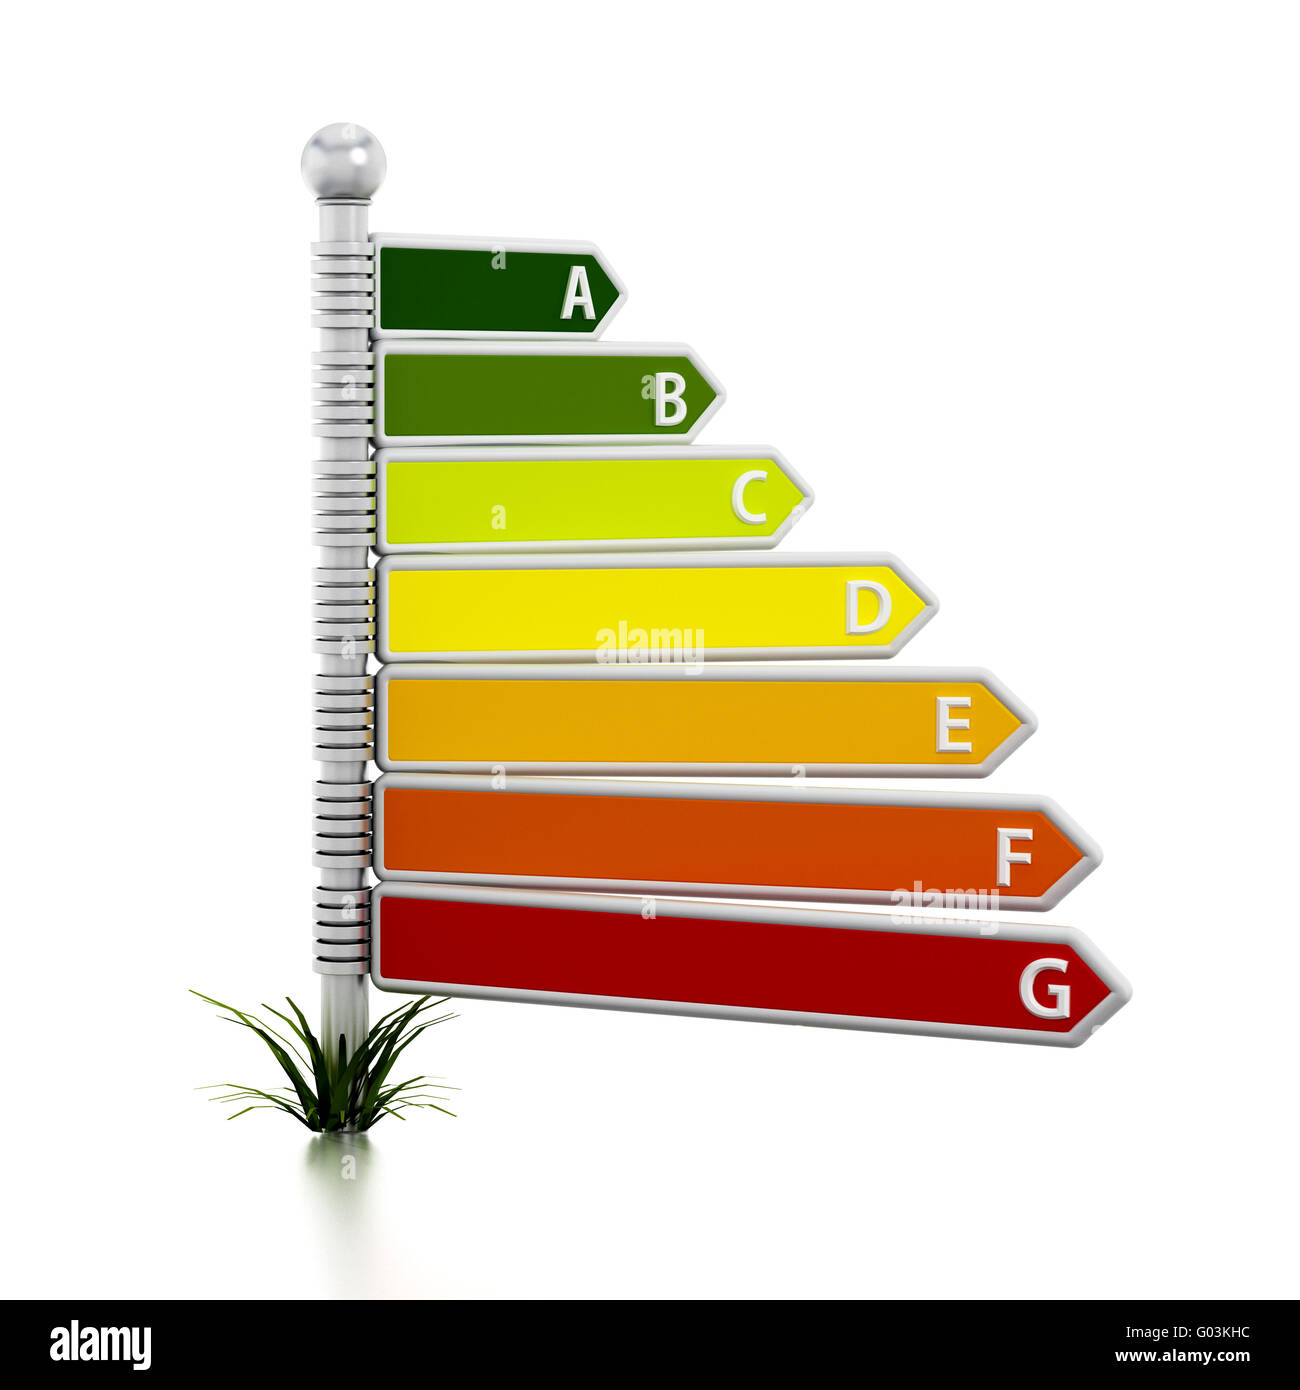 Energy efficiency chart similar to direction signs isolated on white background. Stock Photo